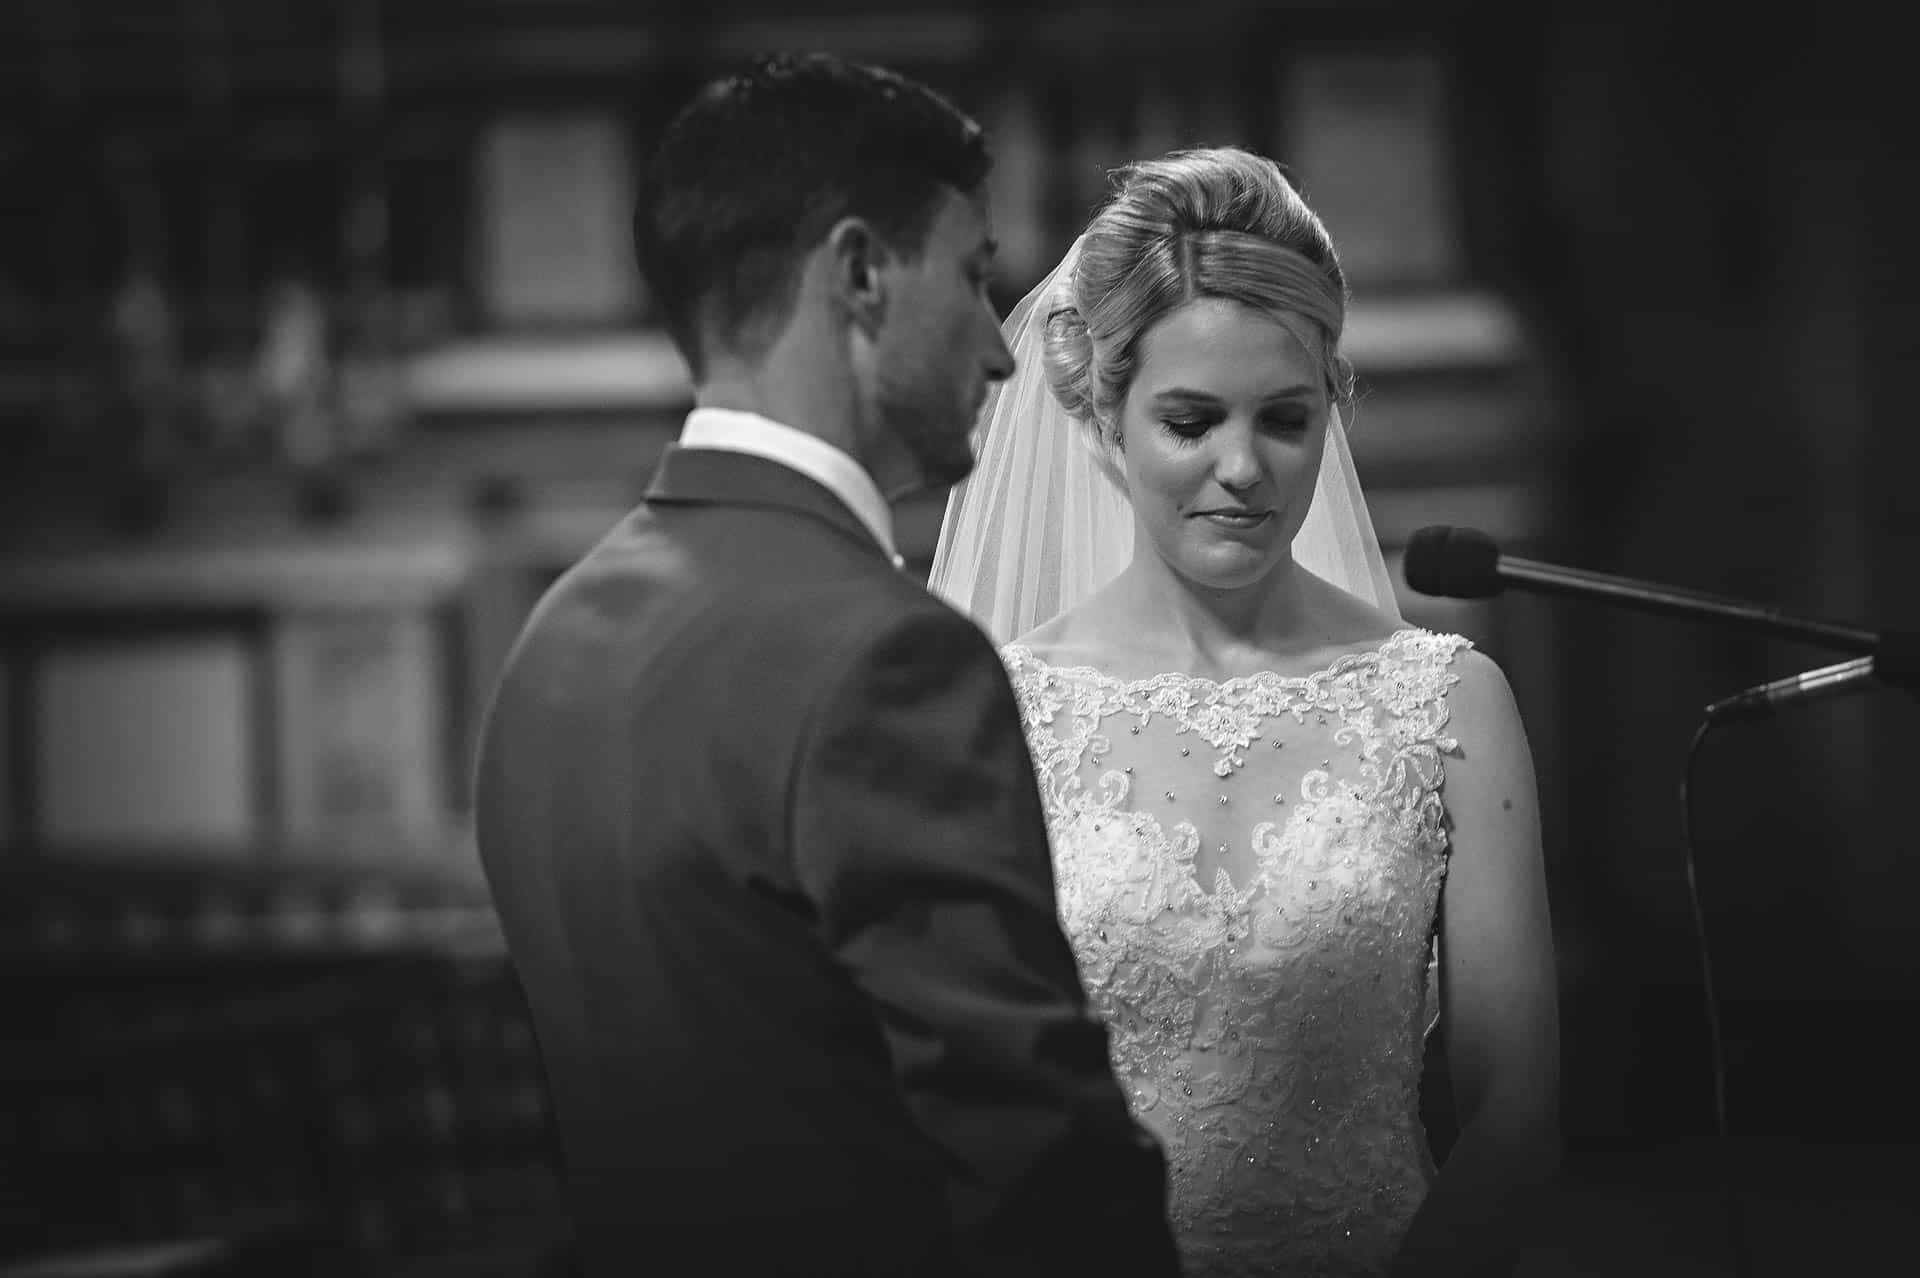 Bride Looking Thoughtful During Wedding at Brompton Oratory